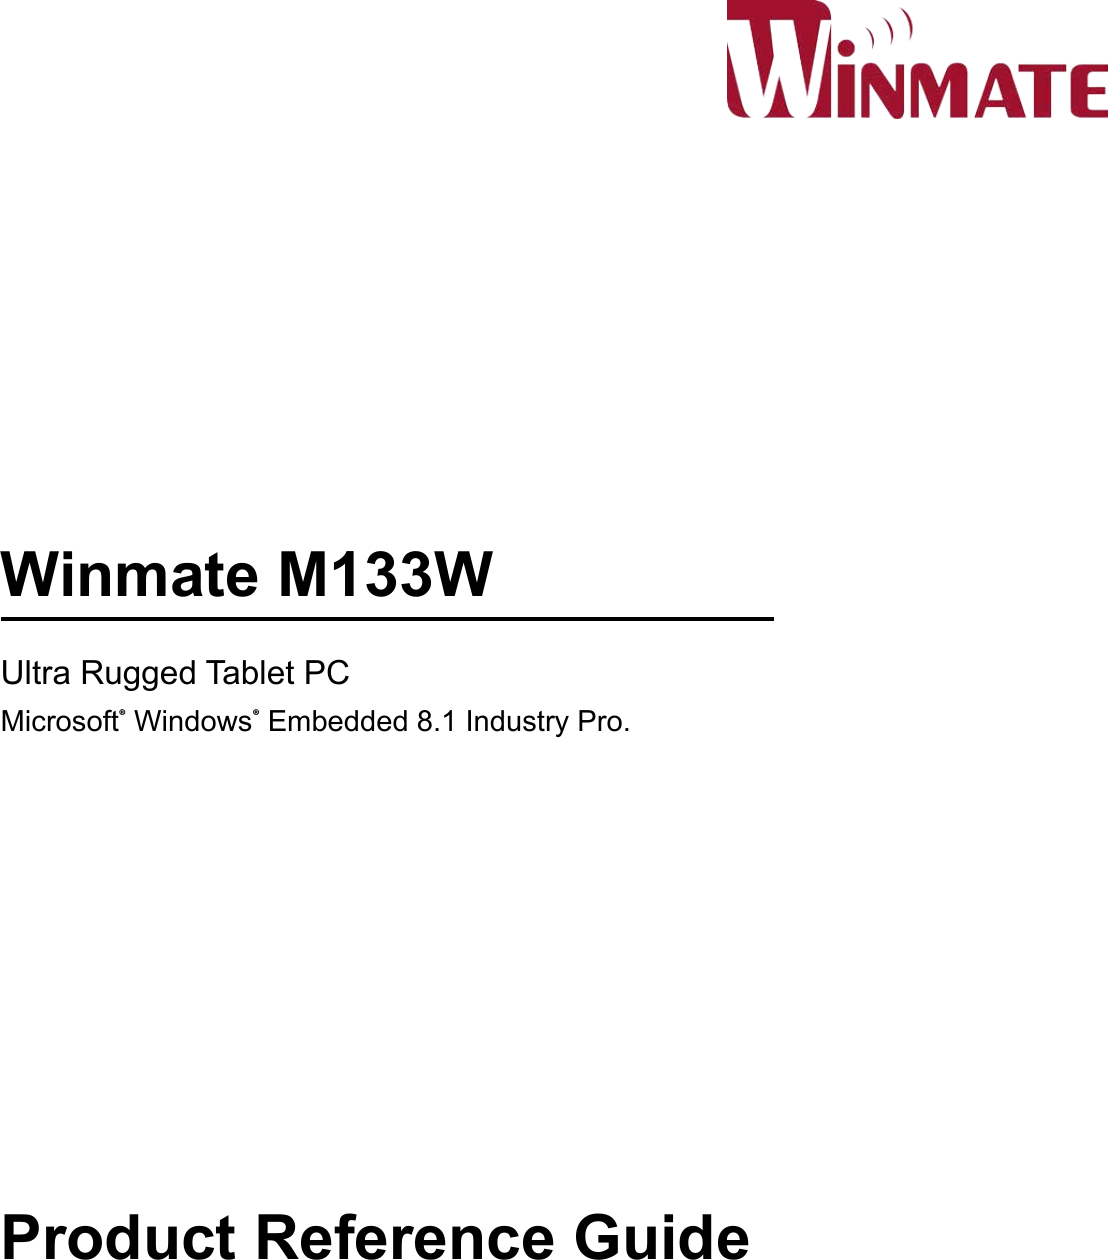 Winmate M133WUltra Rugged Tablet PCMicrosoft® Windows® Embedded 8.1 Industry Pro.Product Reference Guide